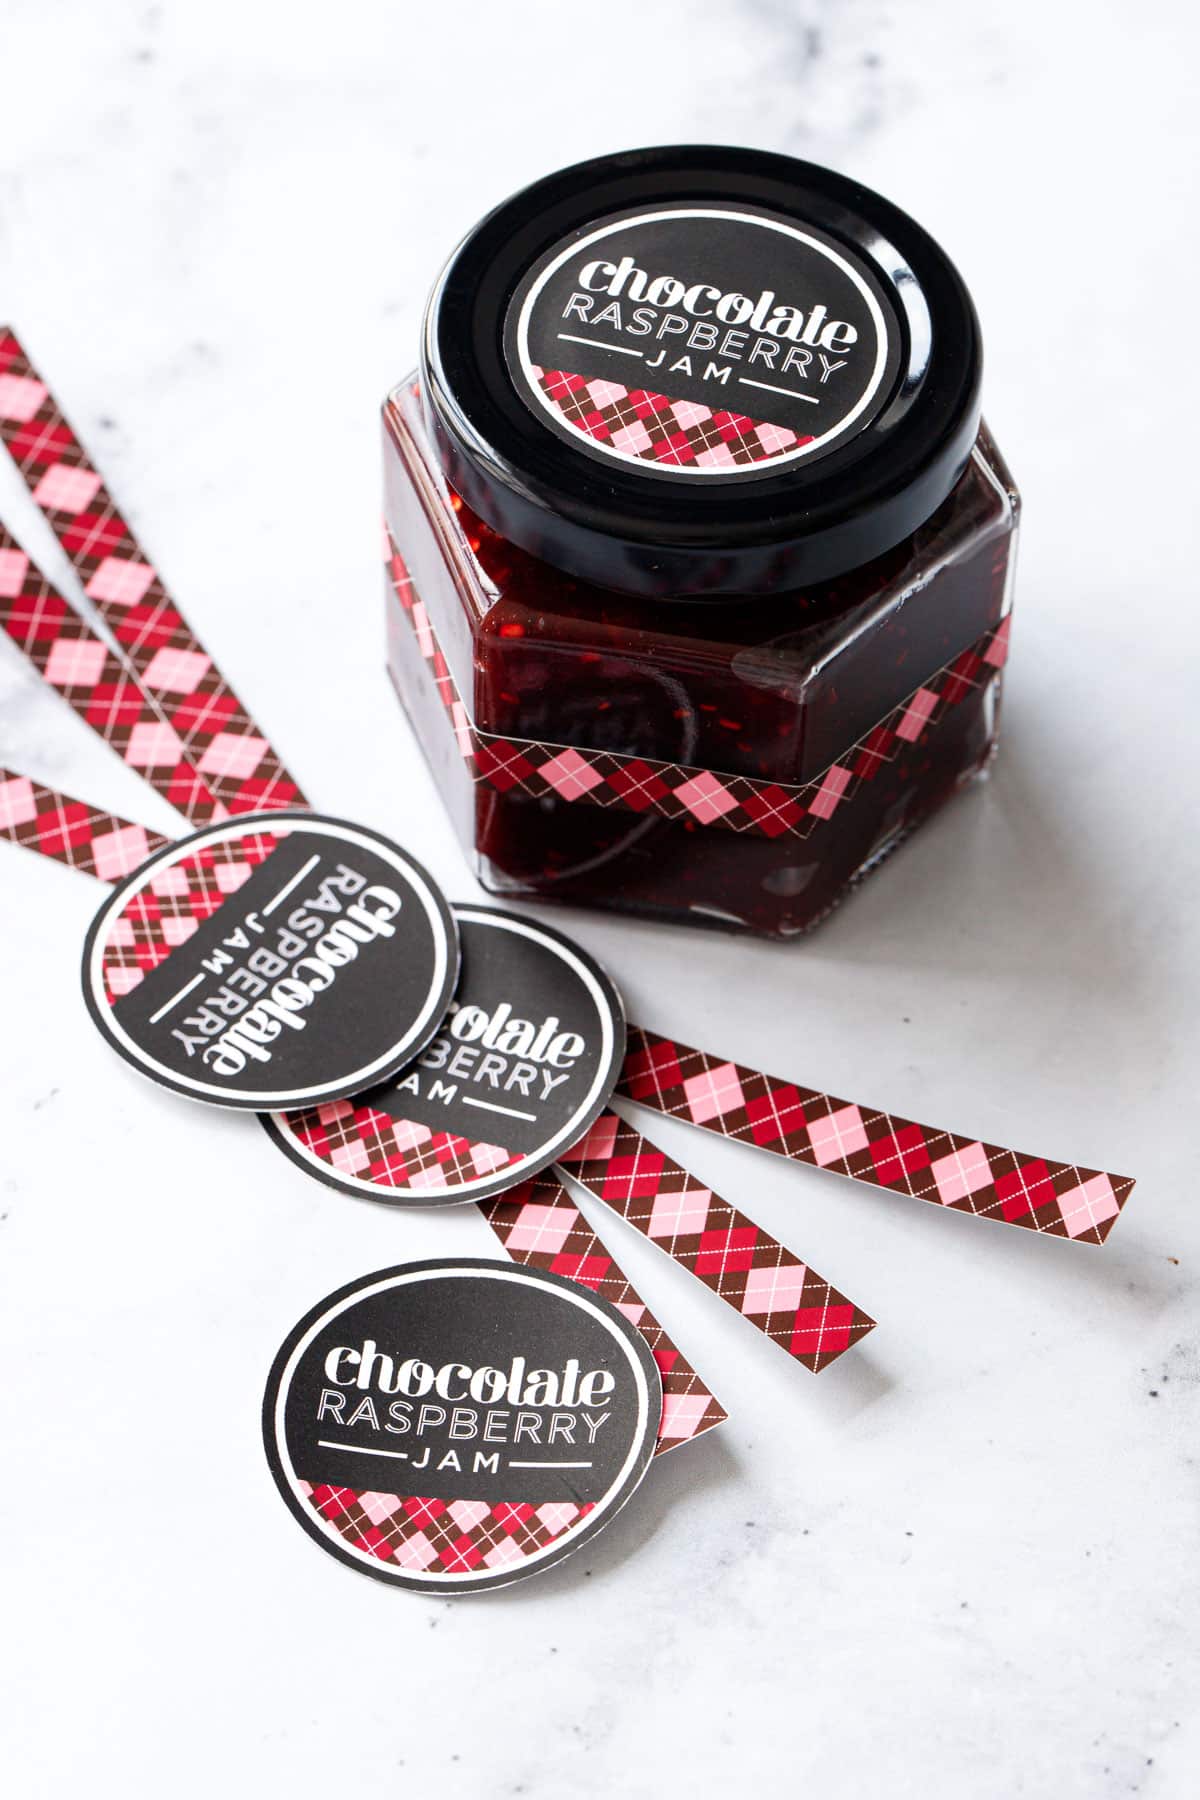 Printable labels and brown and pink argyle pattern bands for jars of Chocolate Raspberry Jam.